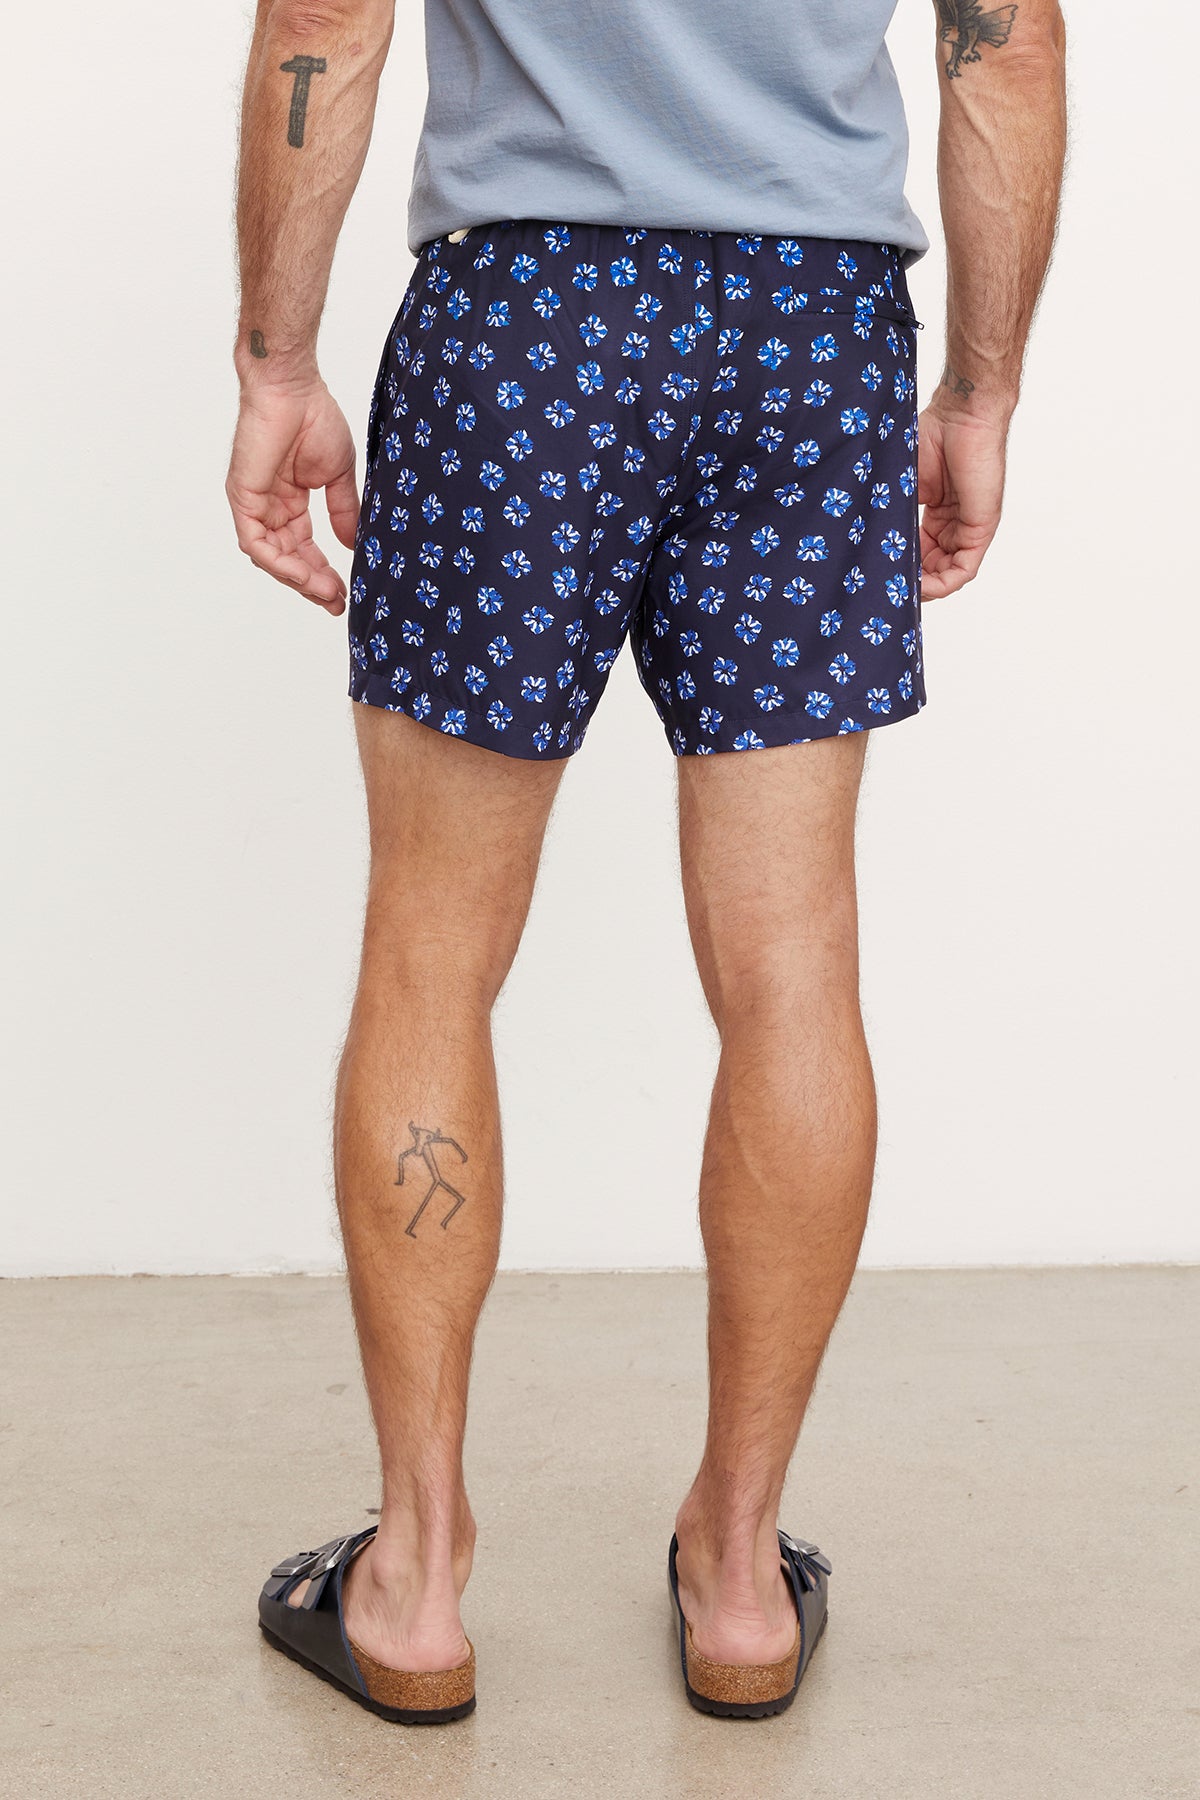   Man wearing Velvet by Graham & Spencer RICARDO SWIM SHORT swim shorts and black flip-flops, standing and showing the side and rear view, with visible tattoos on both arms and left leg. 